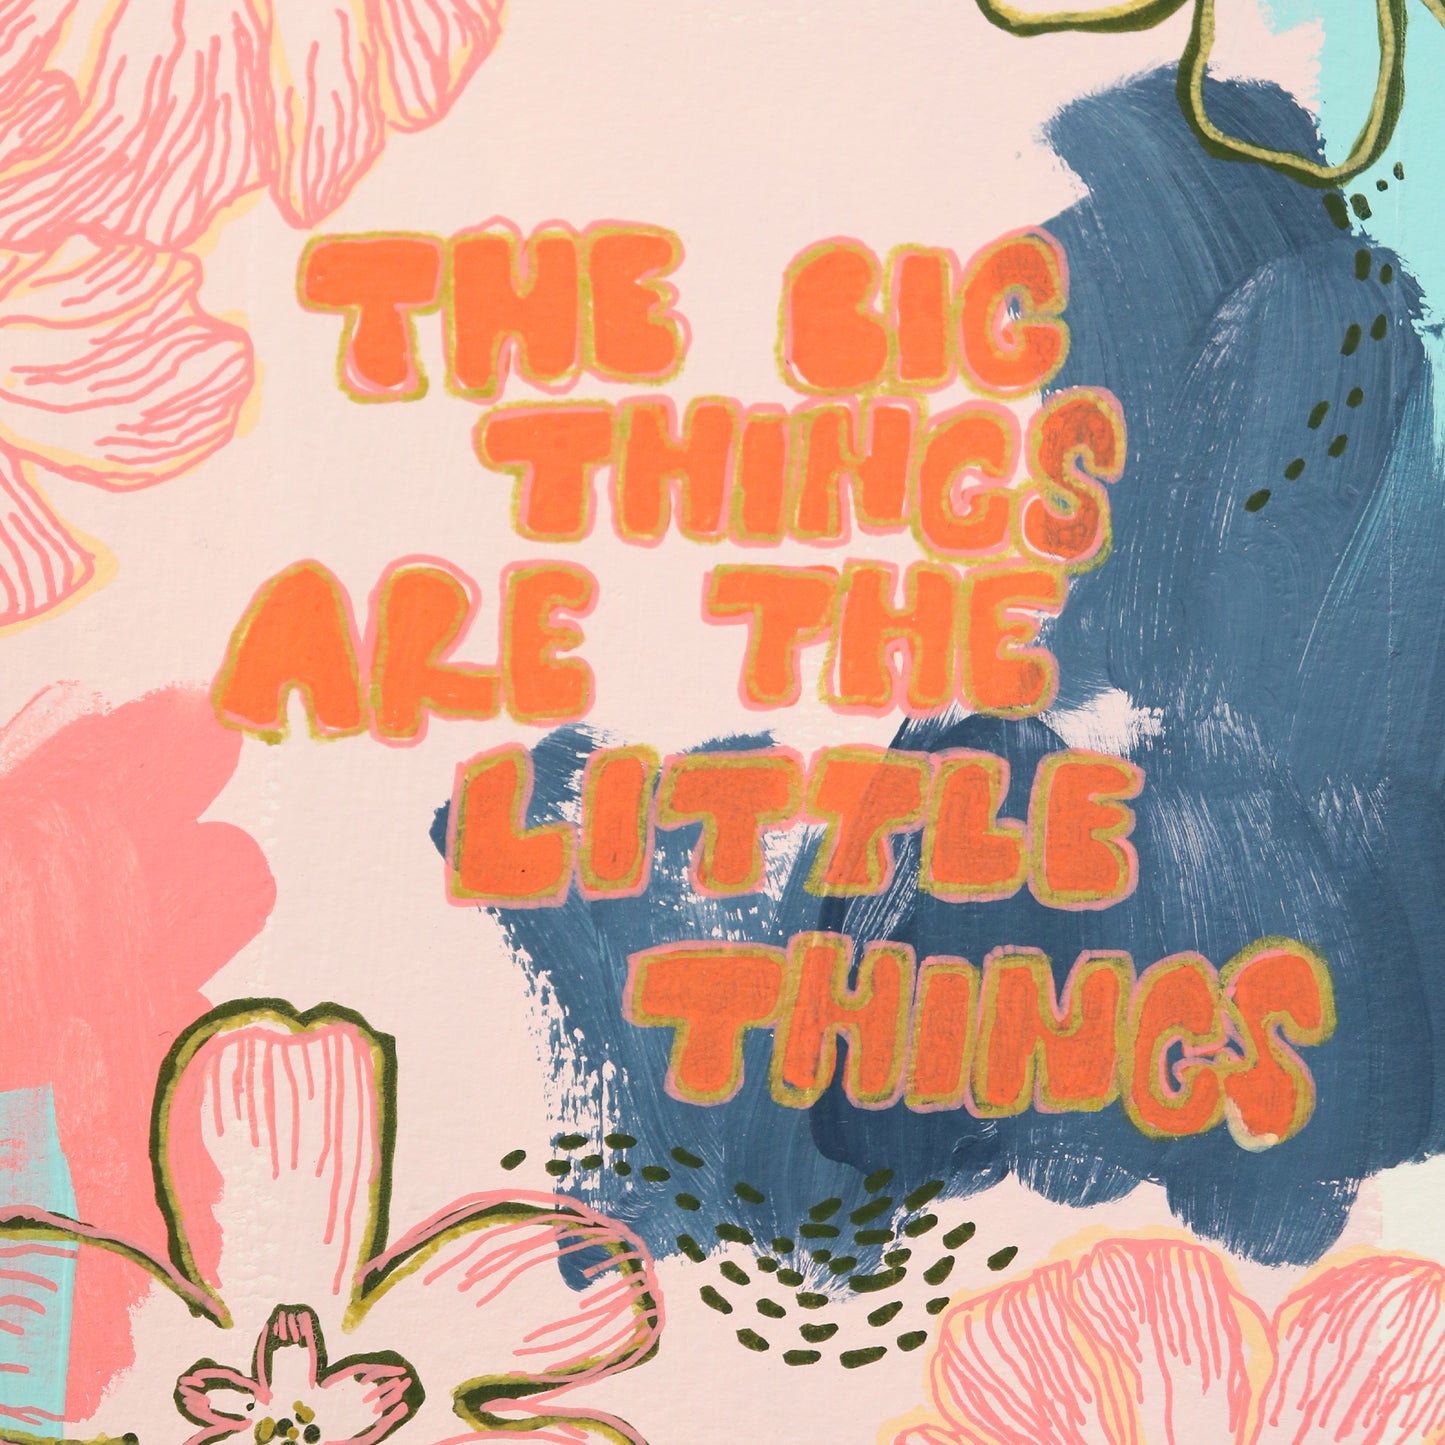 Little Delight #16: The Big Things are the Little Things